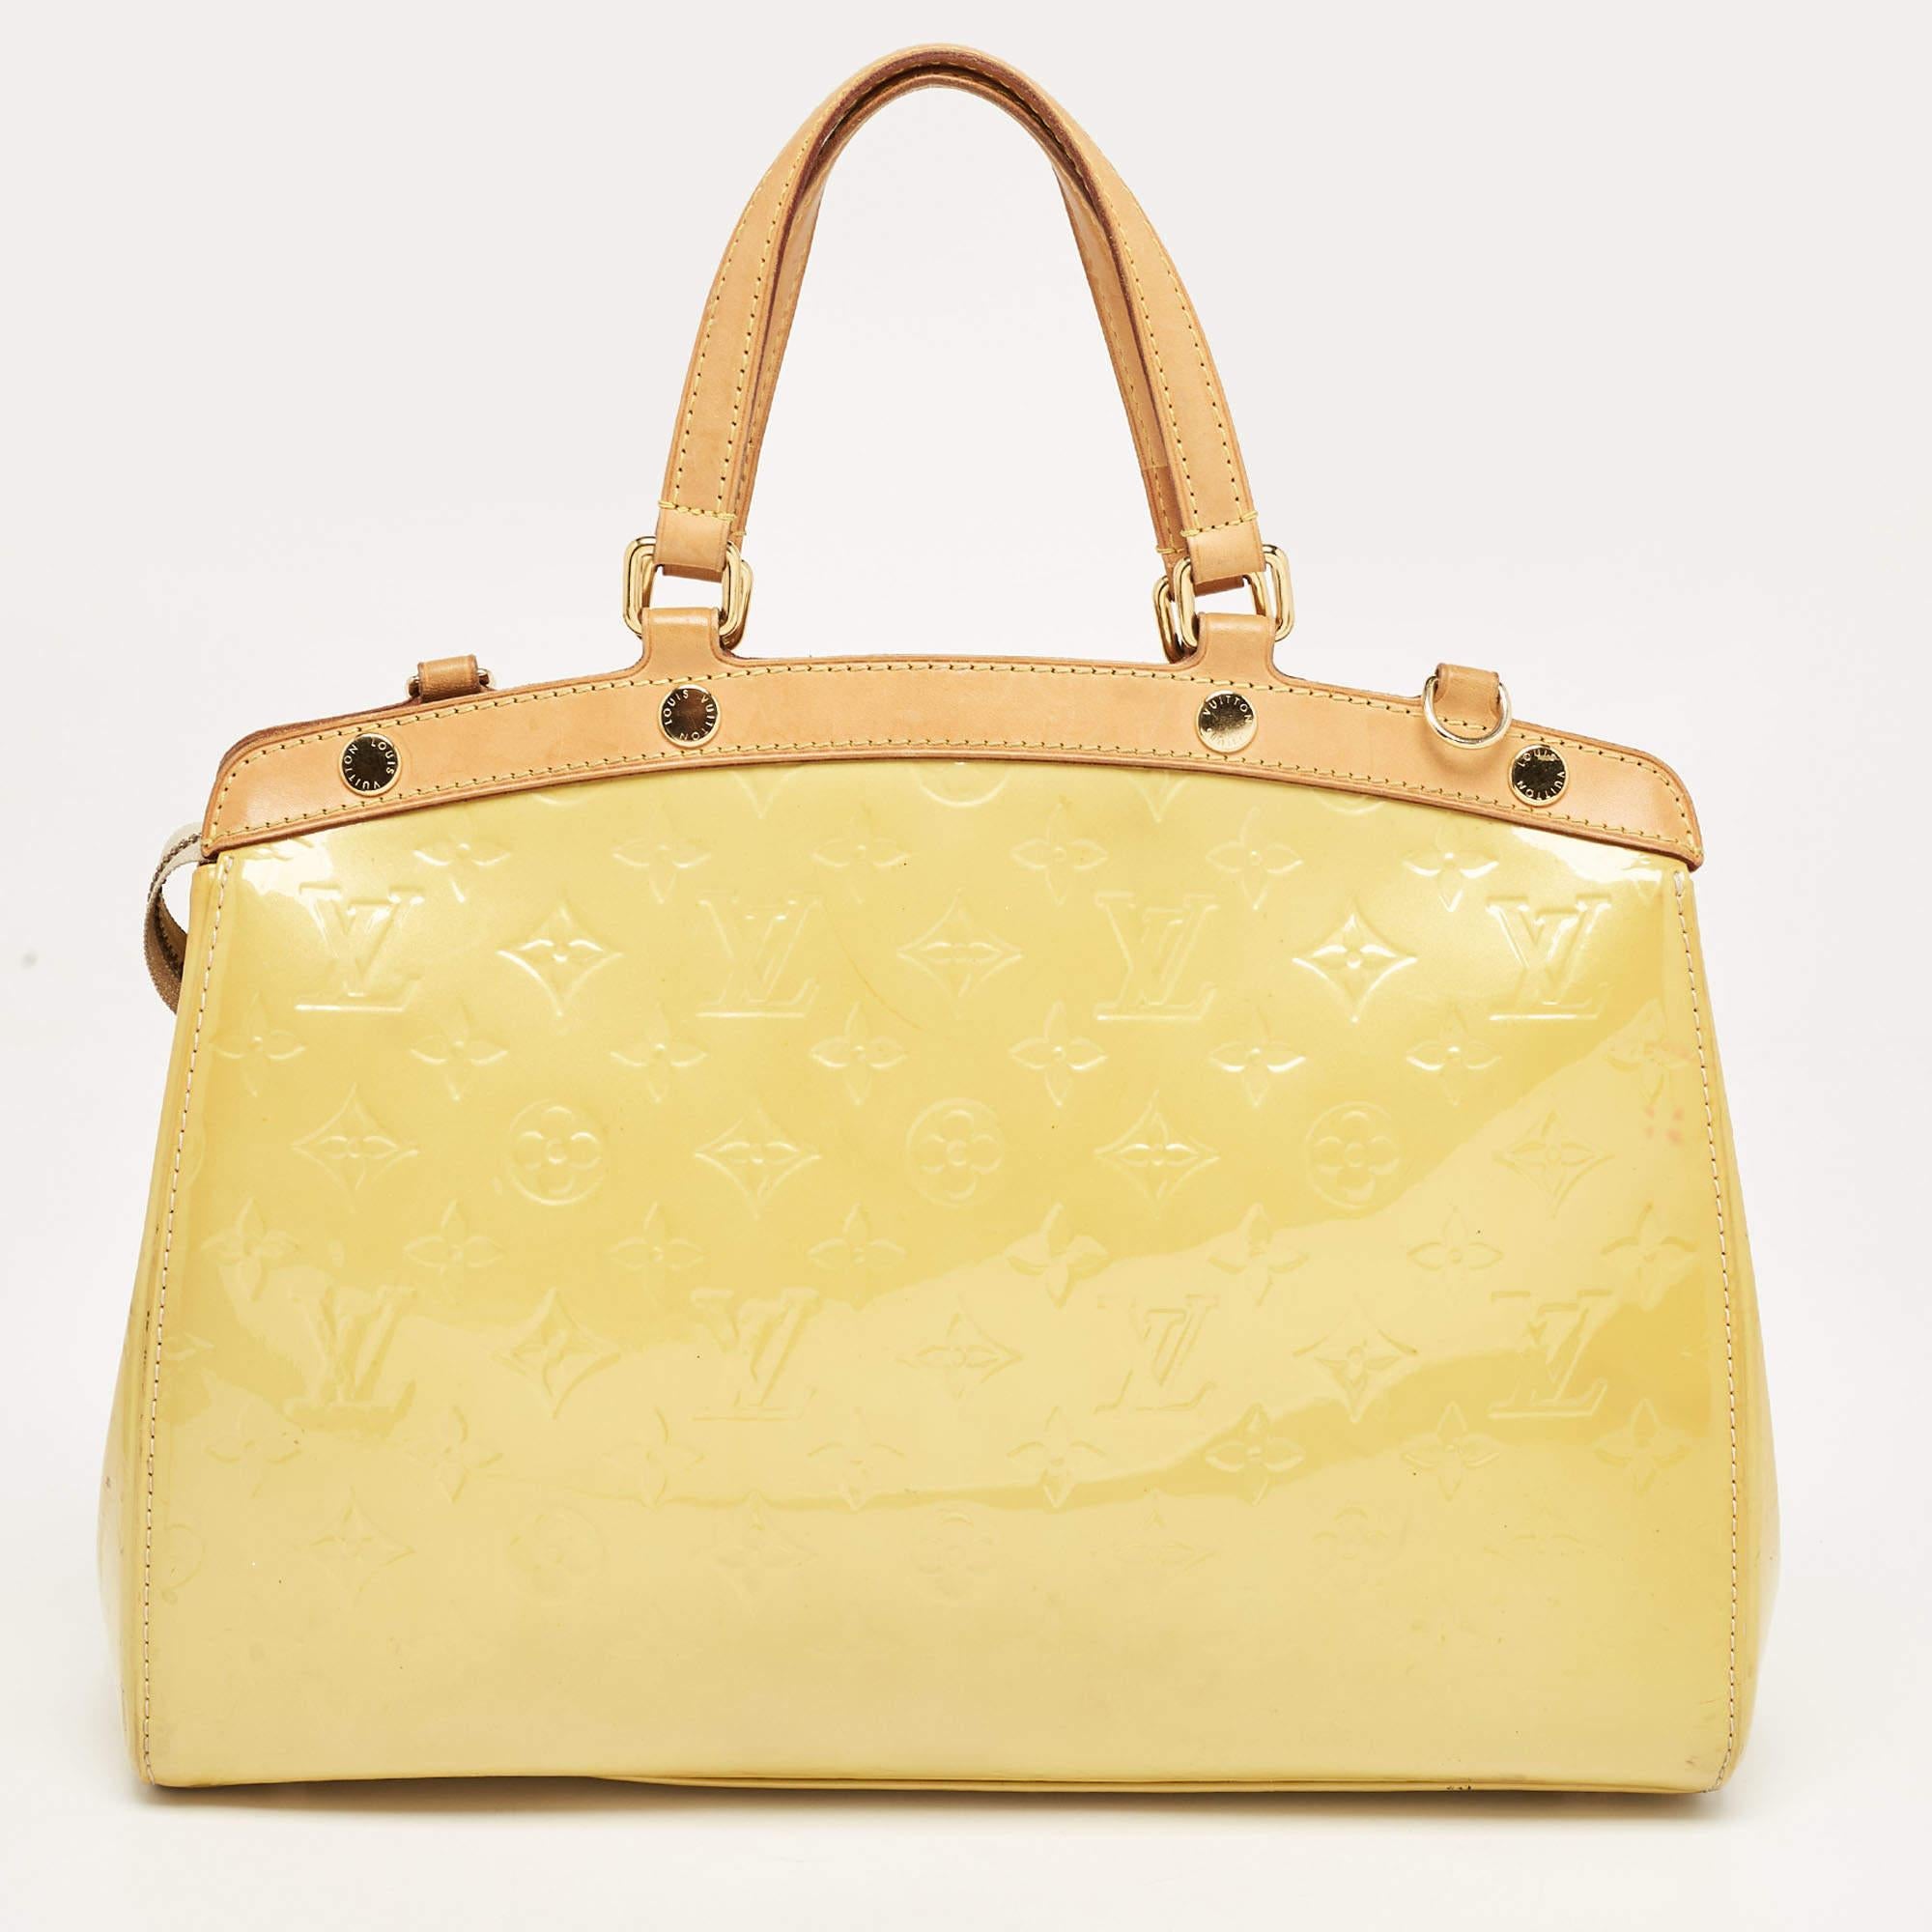 This Brea MM bag from the House of Louis Vuitton will definitely sway you away with its precise shape, style, and design. It is made from Jaune Passion Monogram Vernis into a structured, neat silhouette. It flaunts gold-toned fittings, dual top